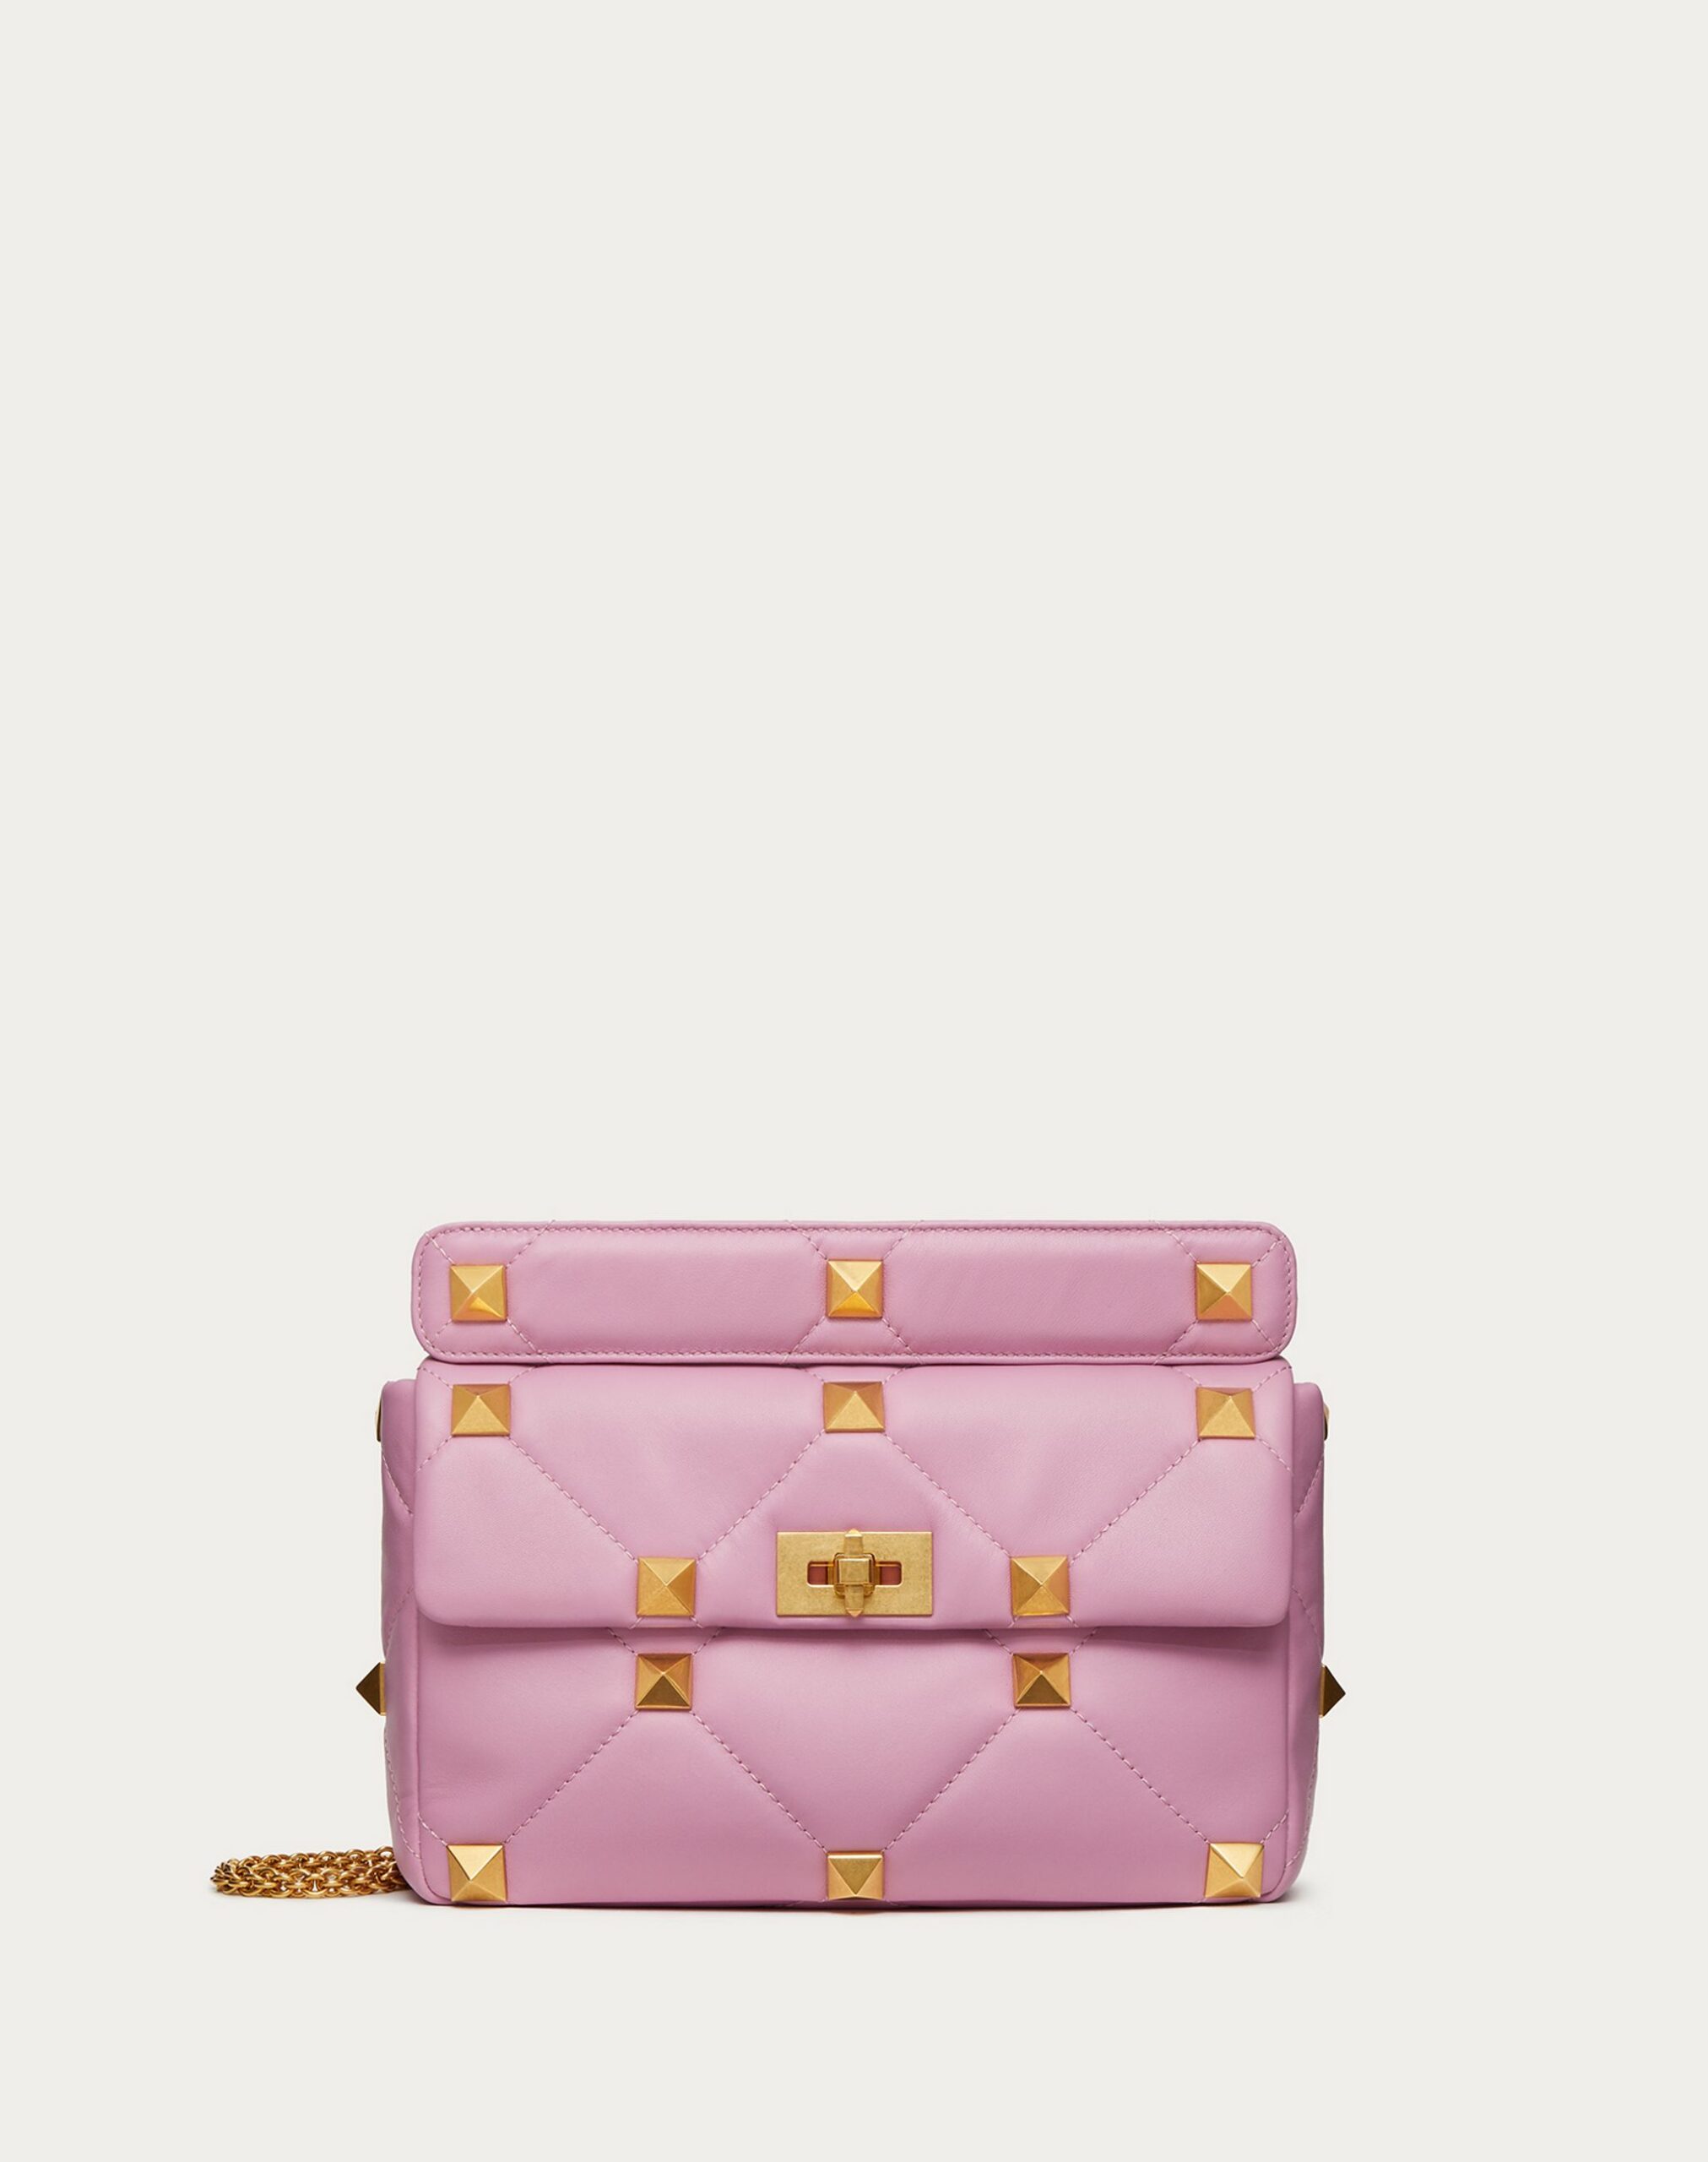 Valentino Large Roman Stud The Shoulder Bag In Nappa With Chain Light Pink (VW2B0I60BSFGI1)